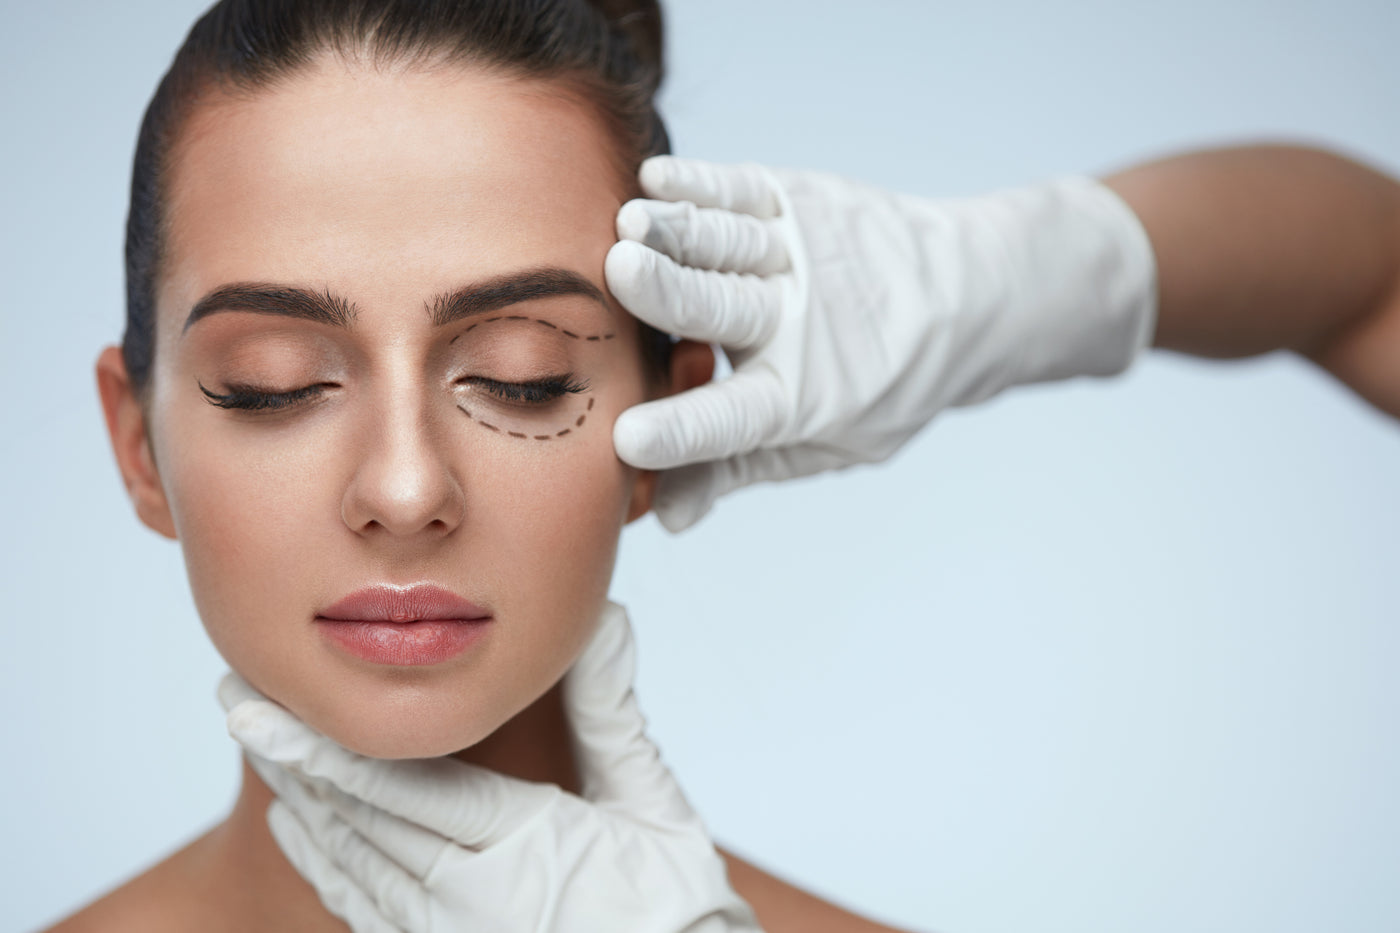 Upper and Lower Blepharoplasty: Recovery Tips